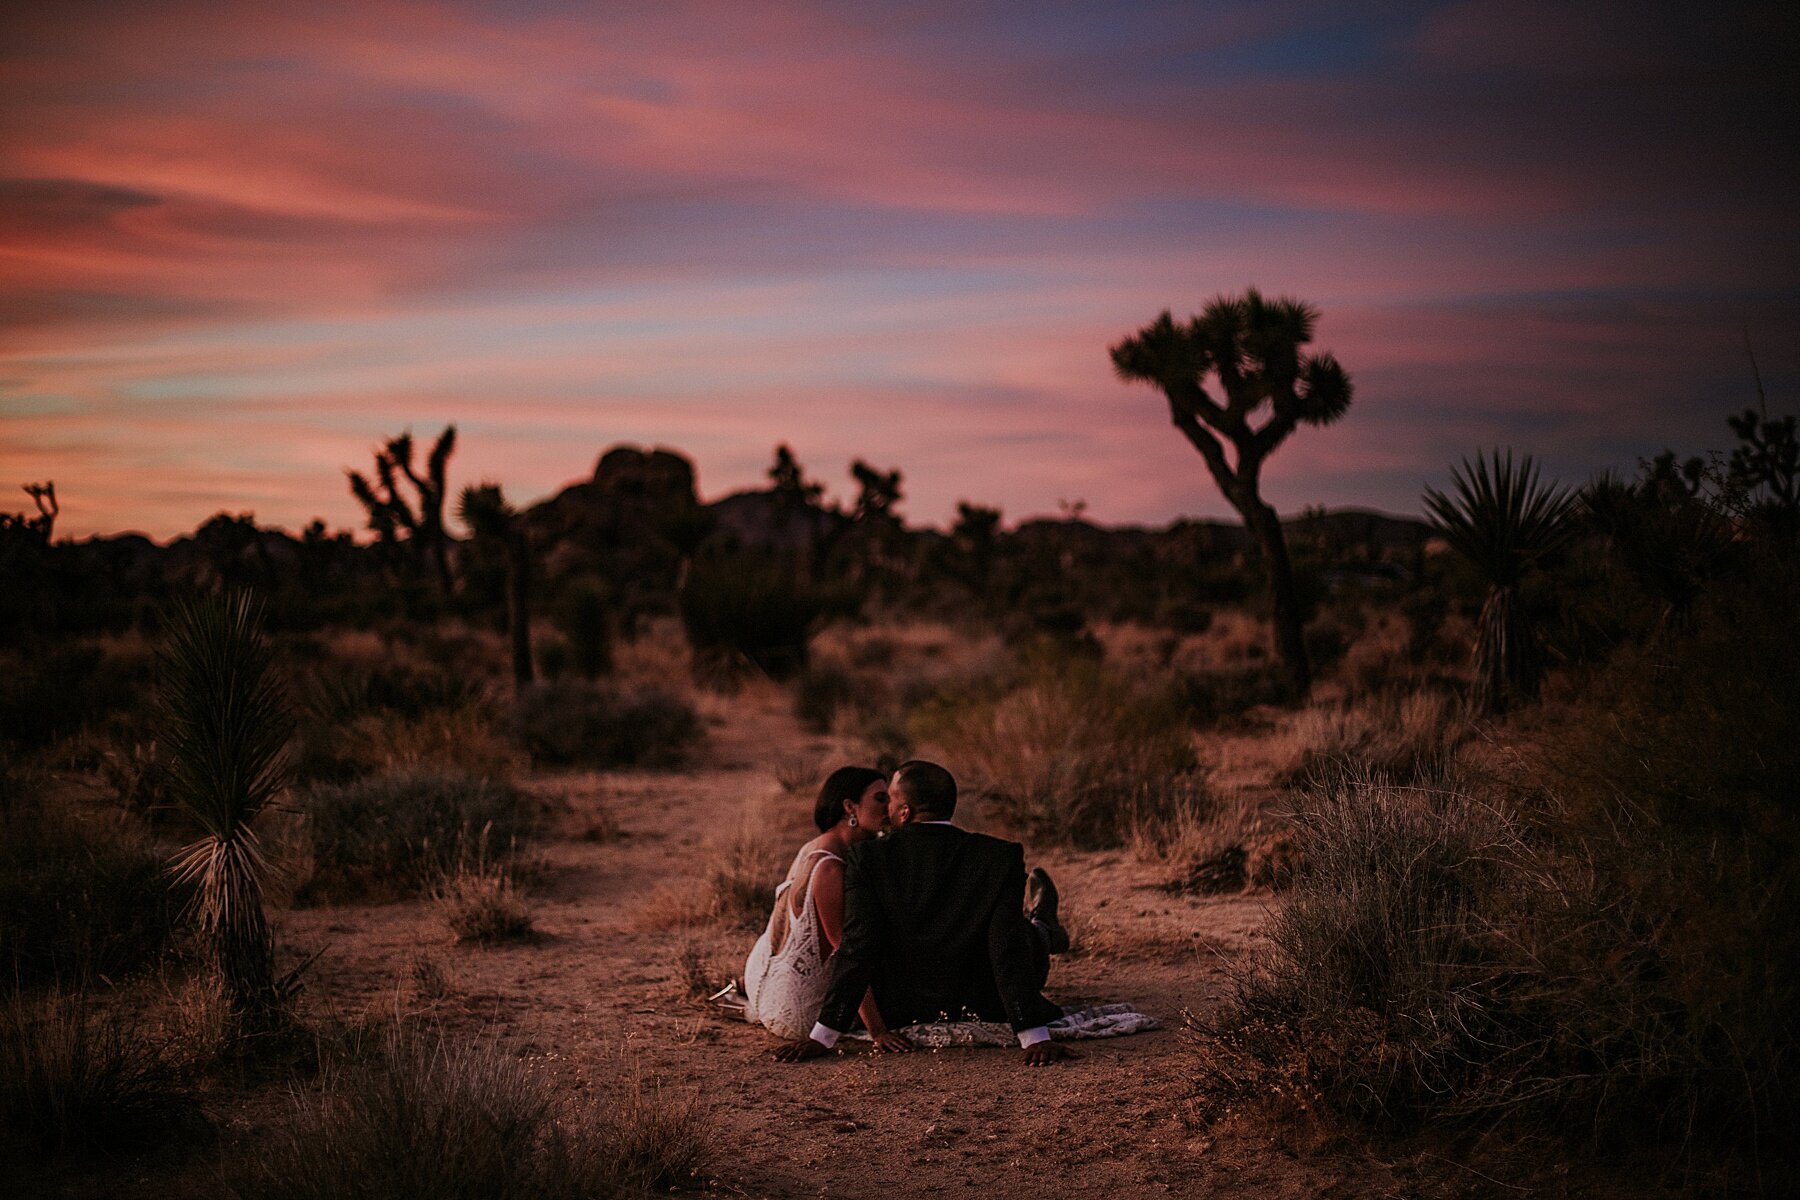 Joshua Tree Elopement | Photography and Videography | Vow of the